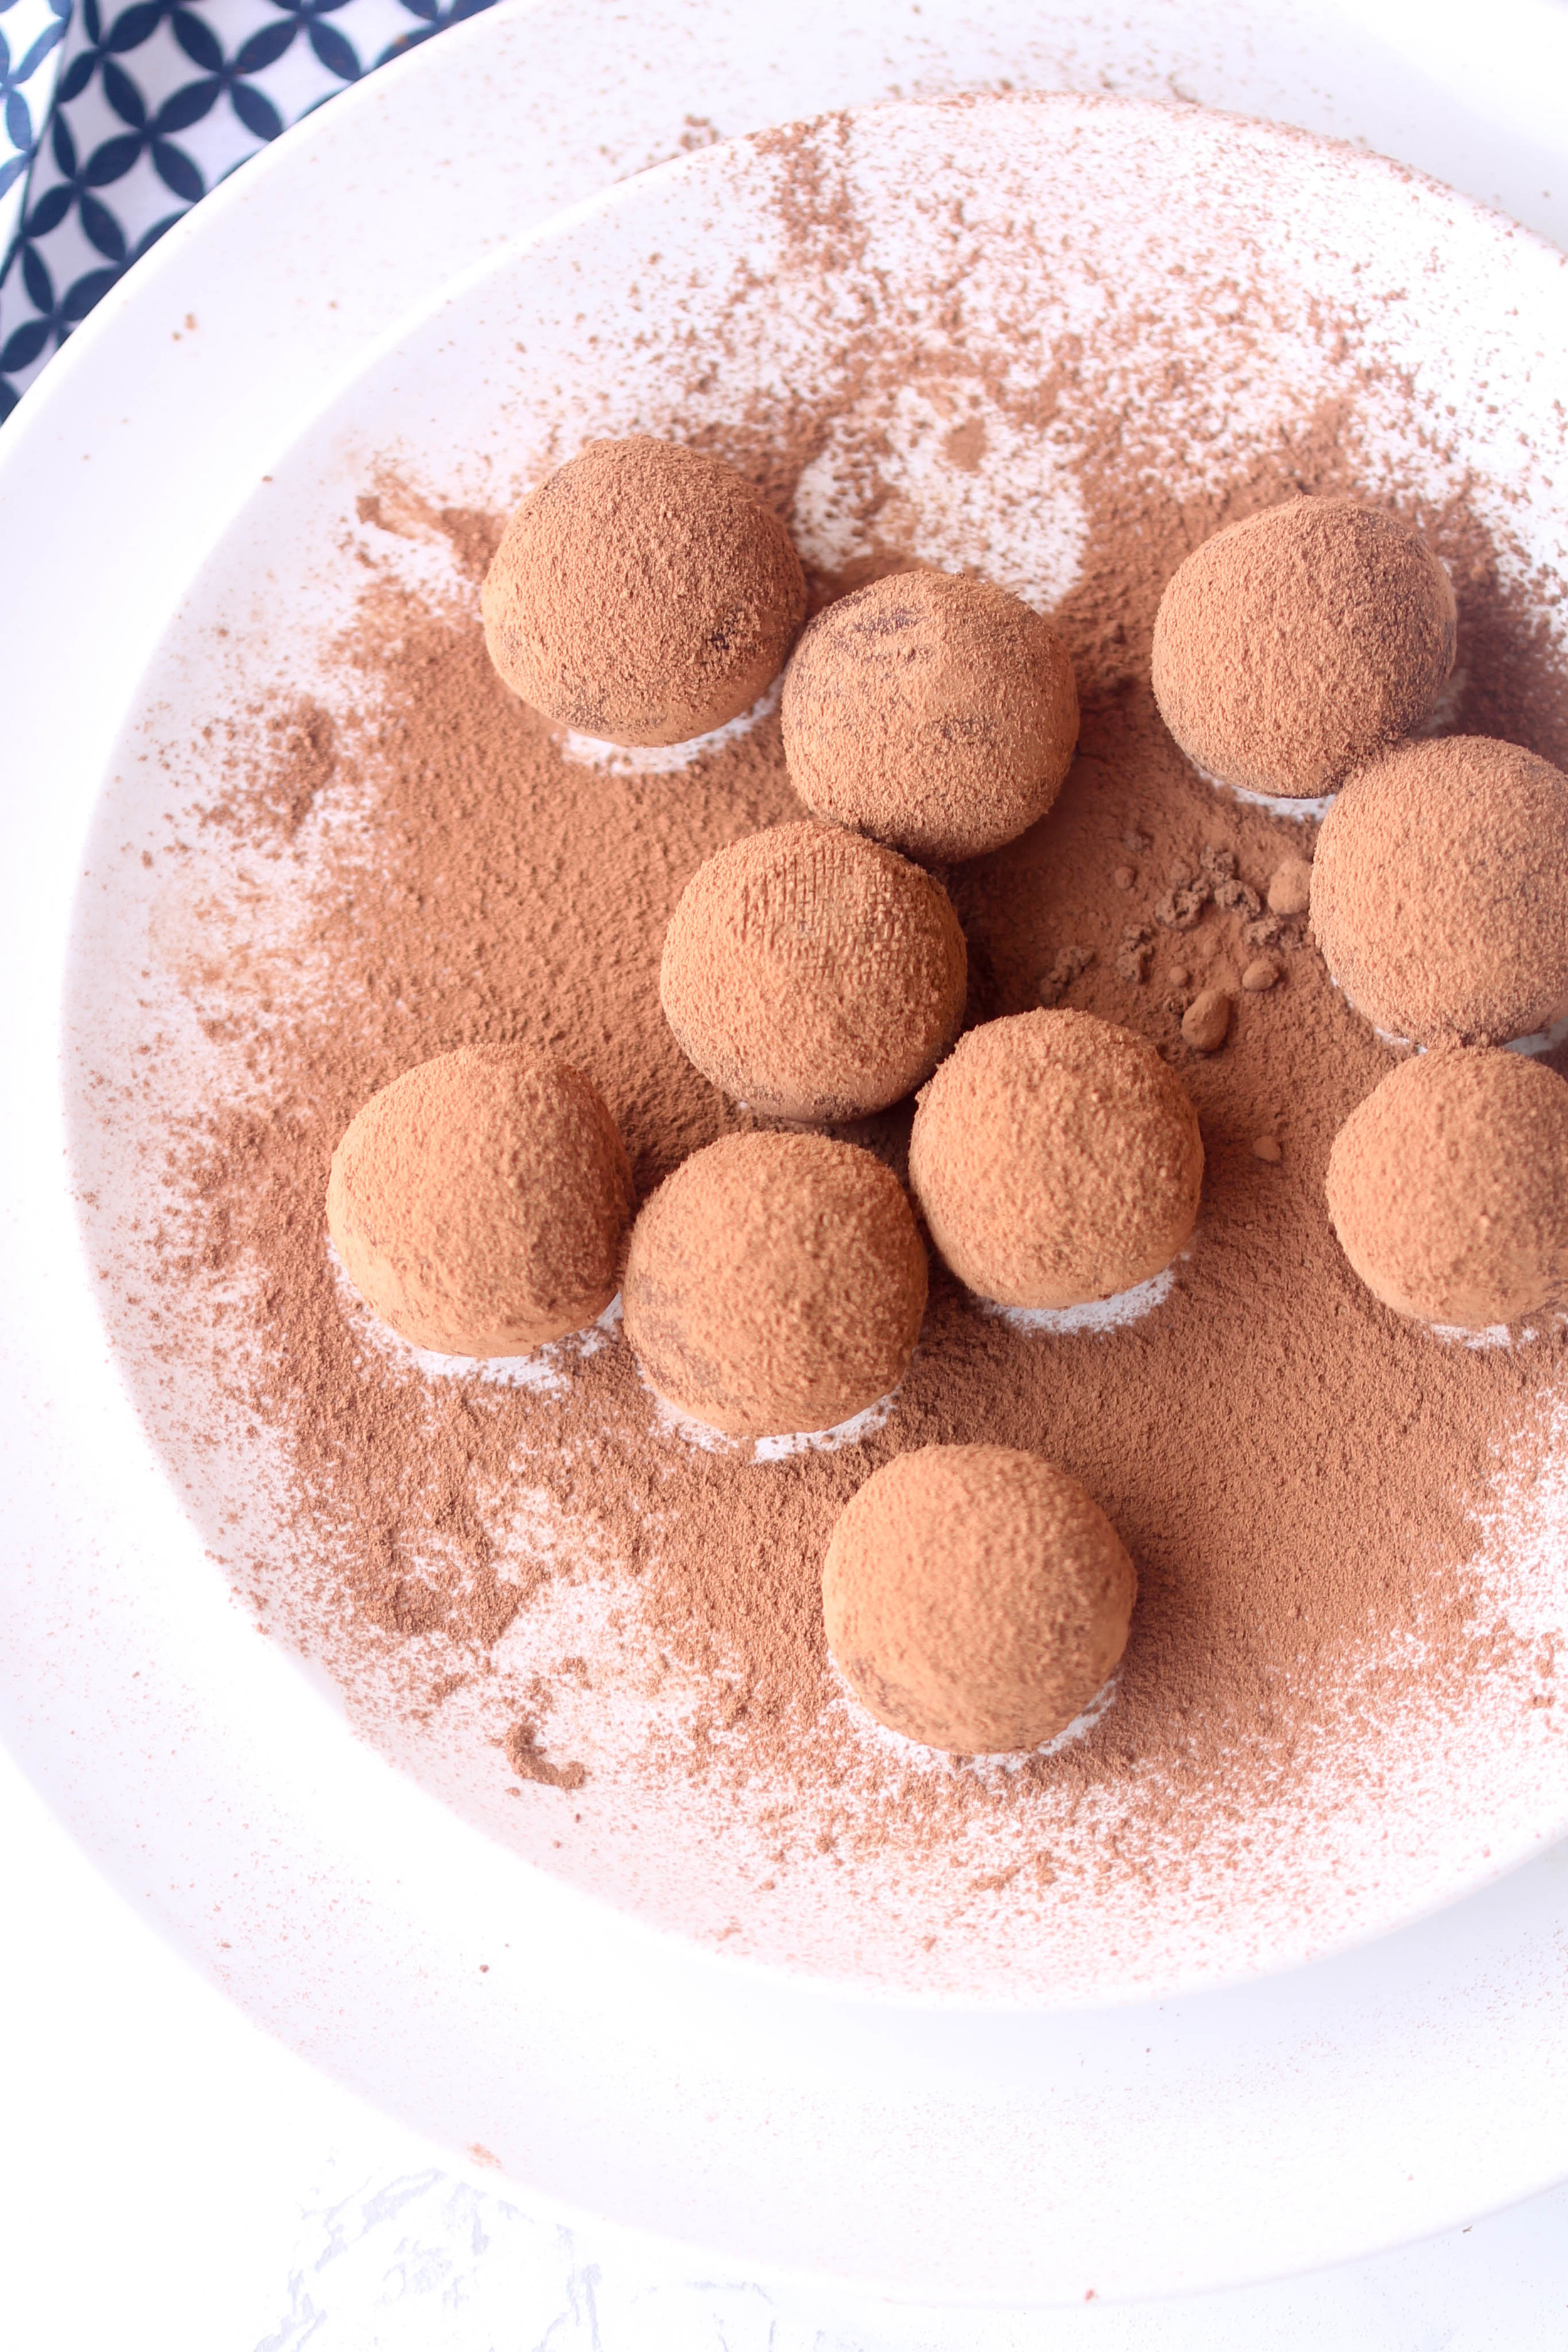 Healthy Chocolate Truffles are perfect bite-size dessert and healthier as it is made with cauliflower mashed potatoes. It is naturally gluten-free and vegan-friendly.